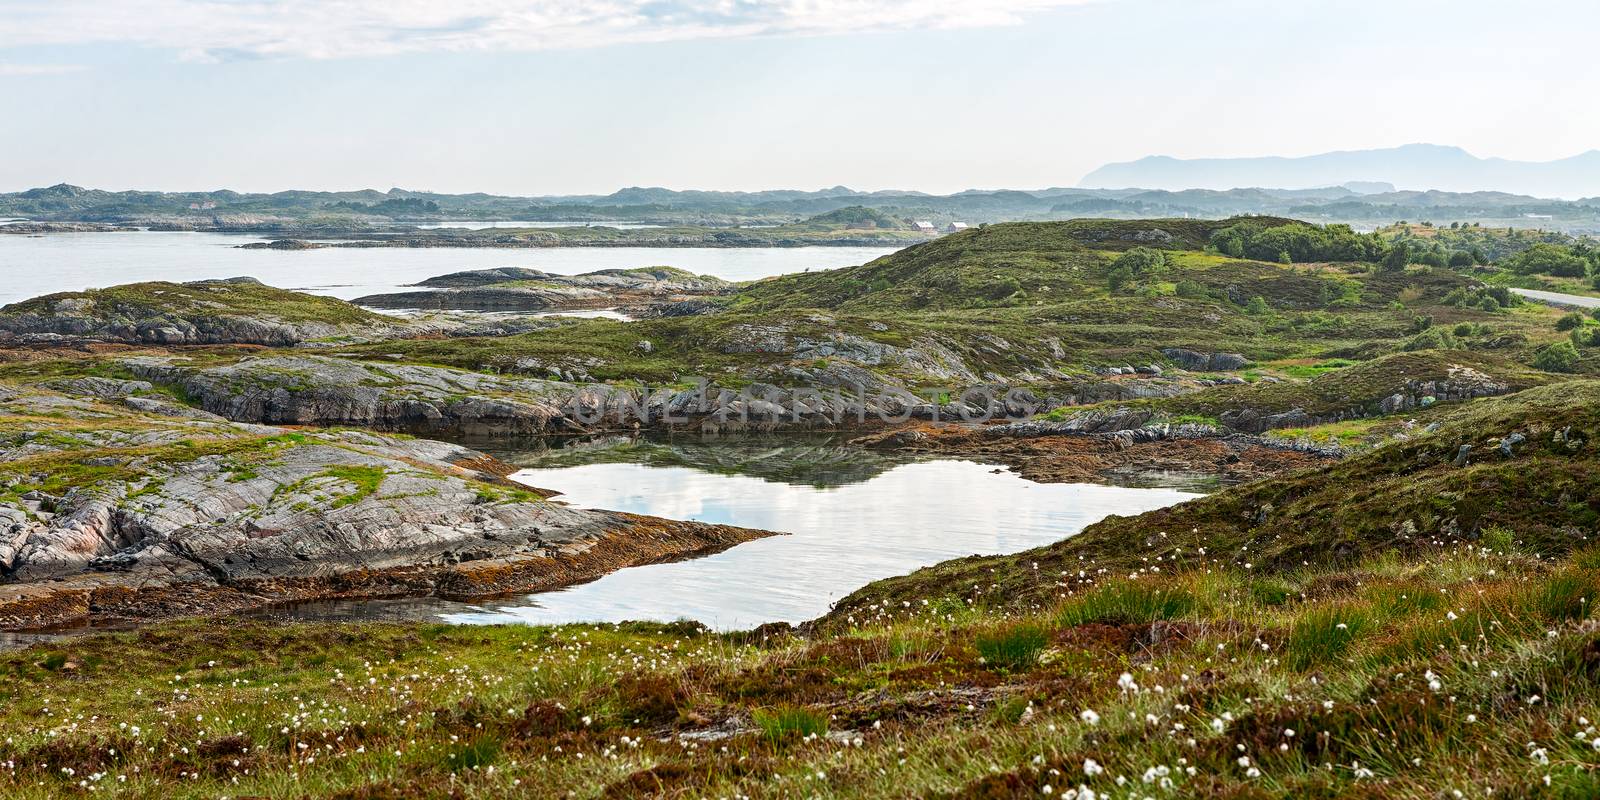 Panorama of the mountain and ocean from the Atlantic road in Hulvagen, Norway